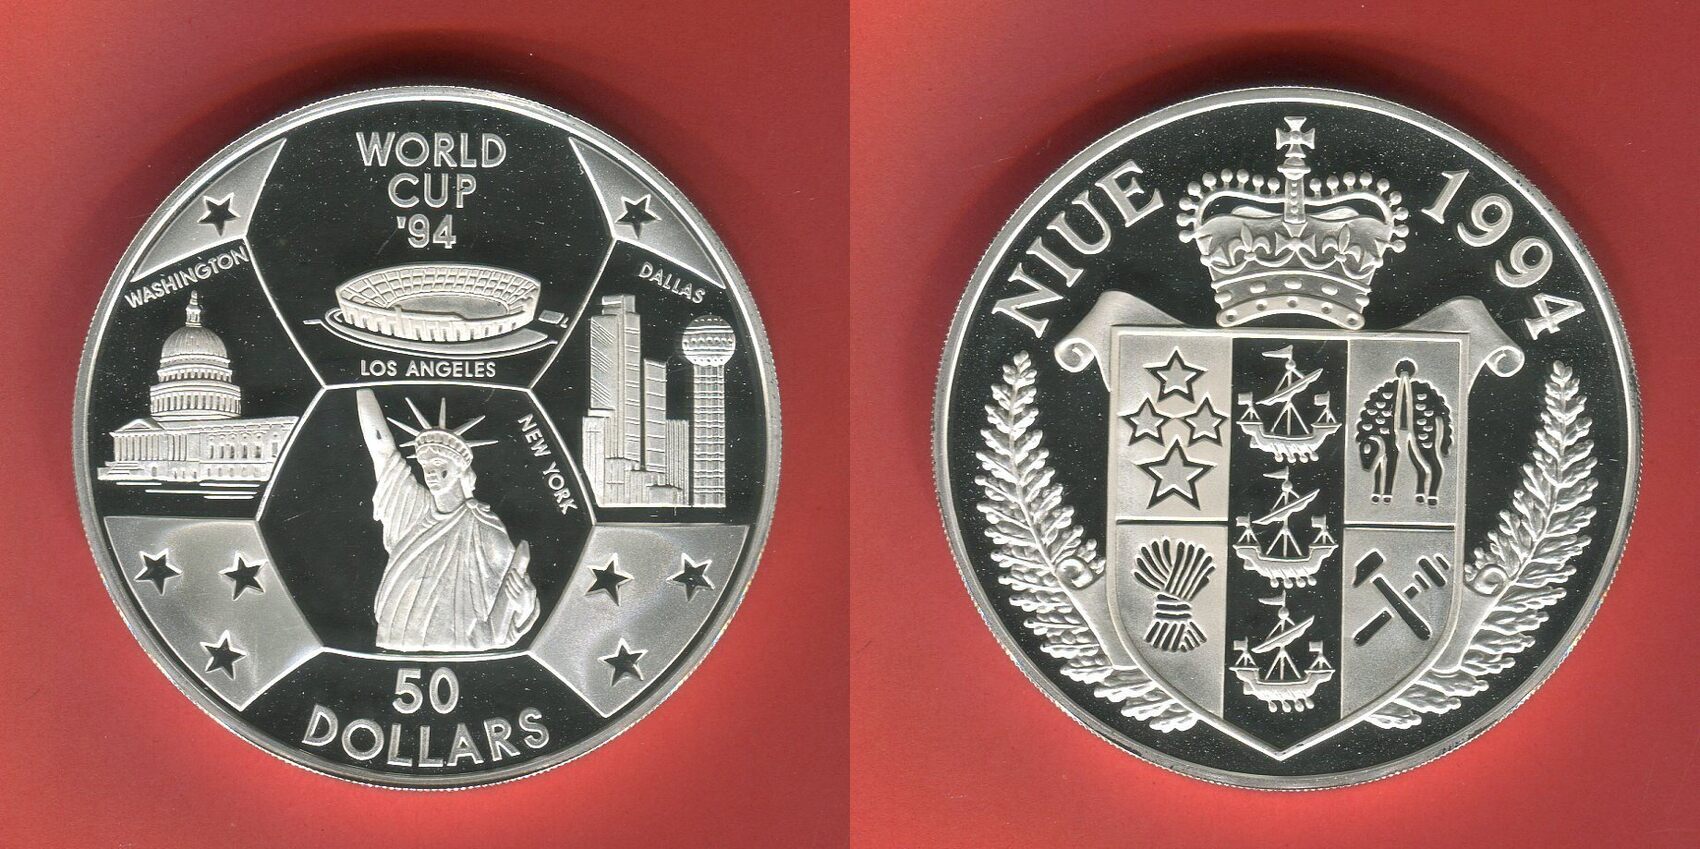 Niue 50 Dollars 1994 Fußball WM Soccer World Cup Proof with capsule